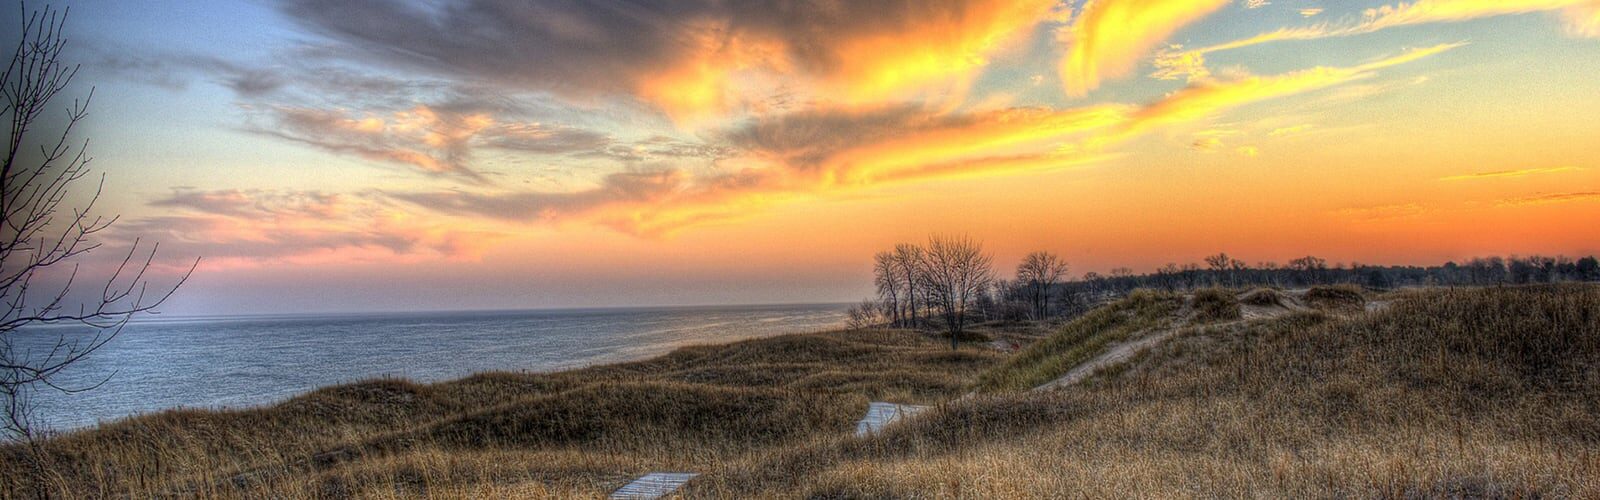 The sun setting over Lake Michigan as seen from Kohler-Andre State Park.